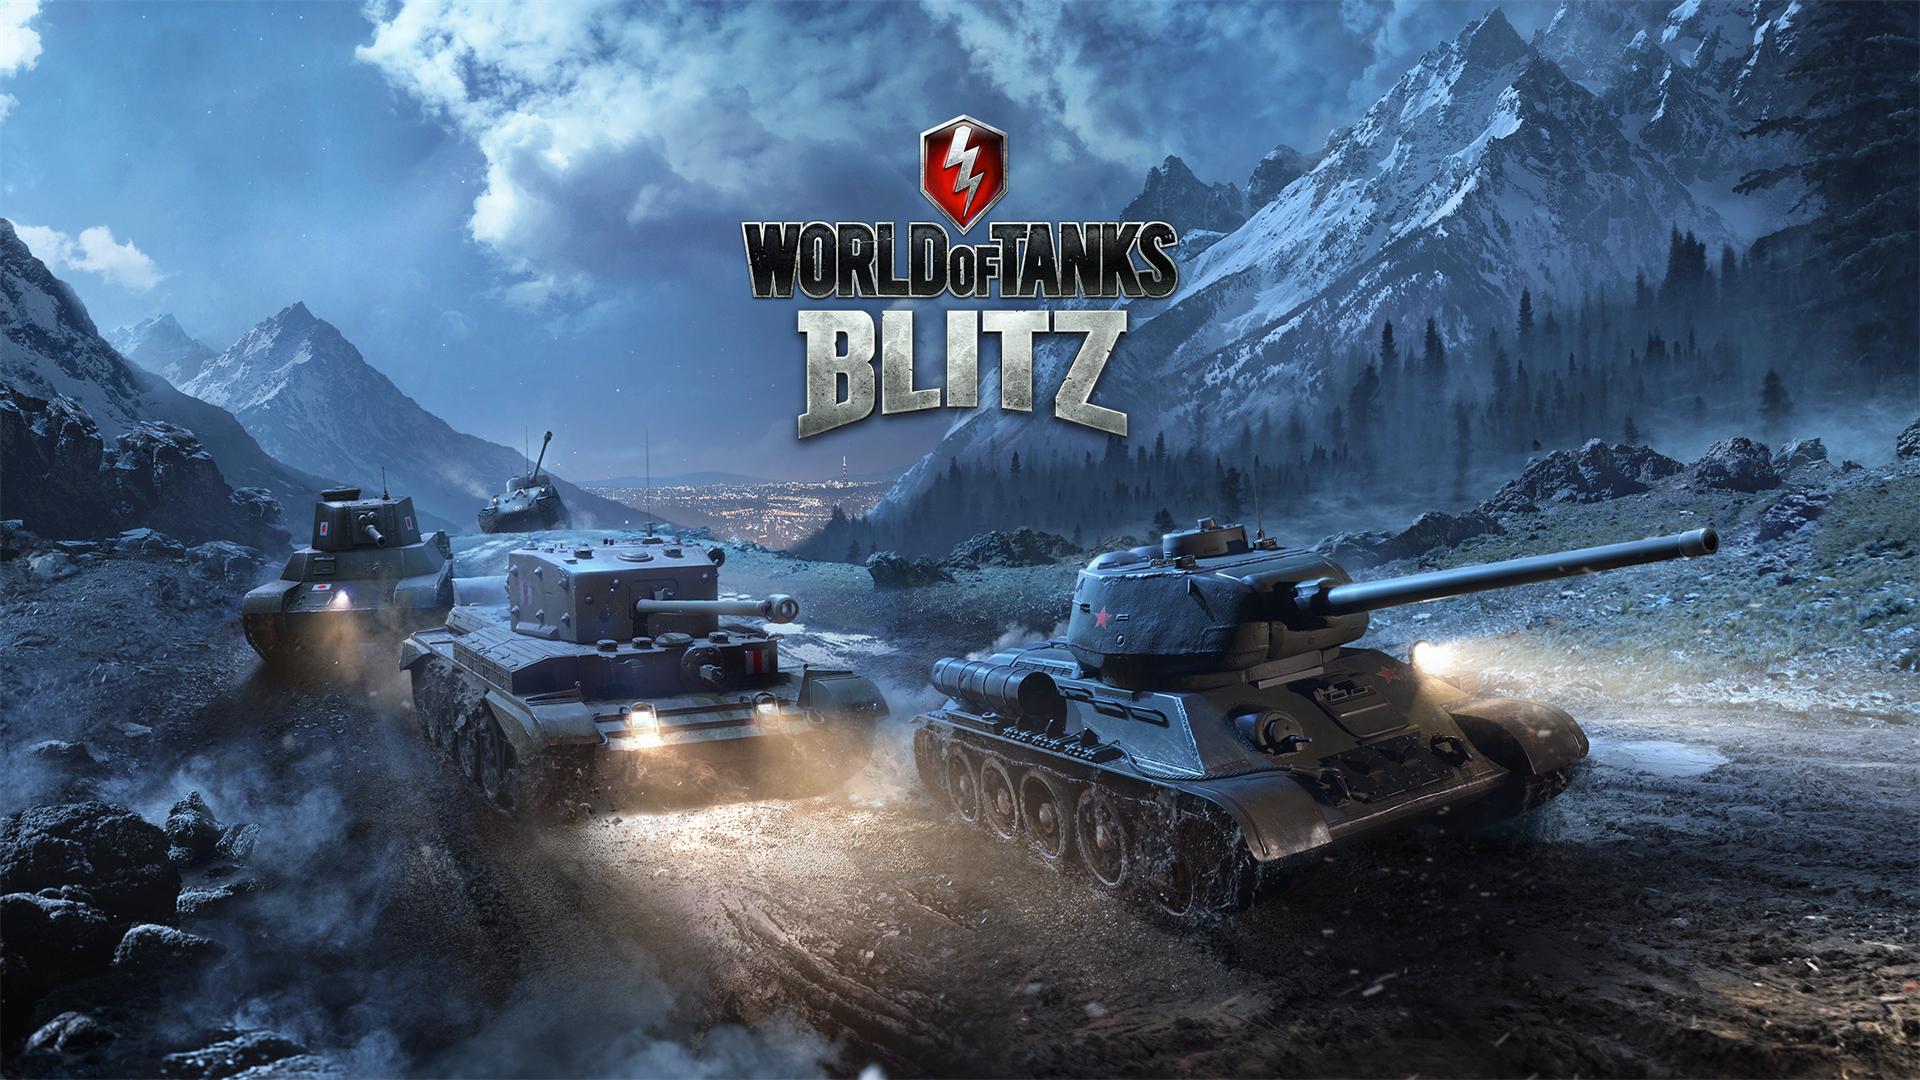 world of tanks blitz wallpaper,action adventure game,combat vehicle,tank,strategy video game,pc game